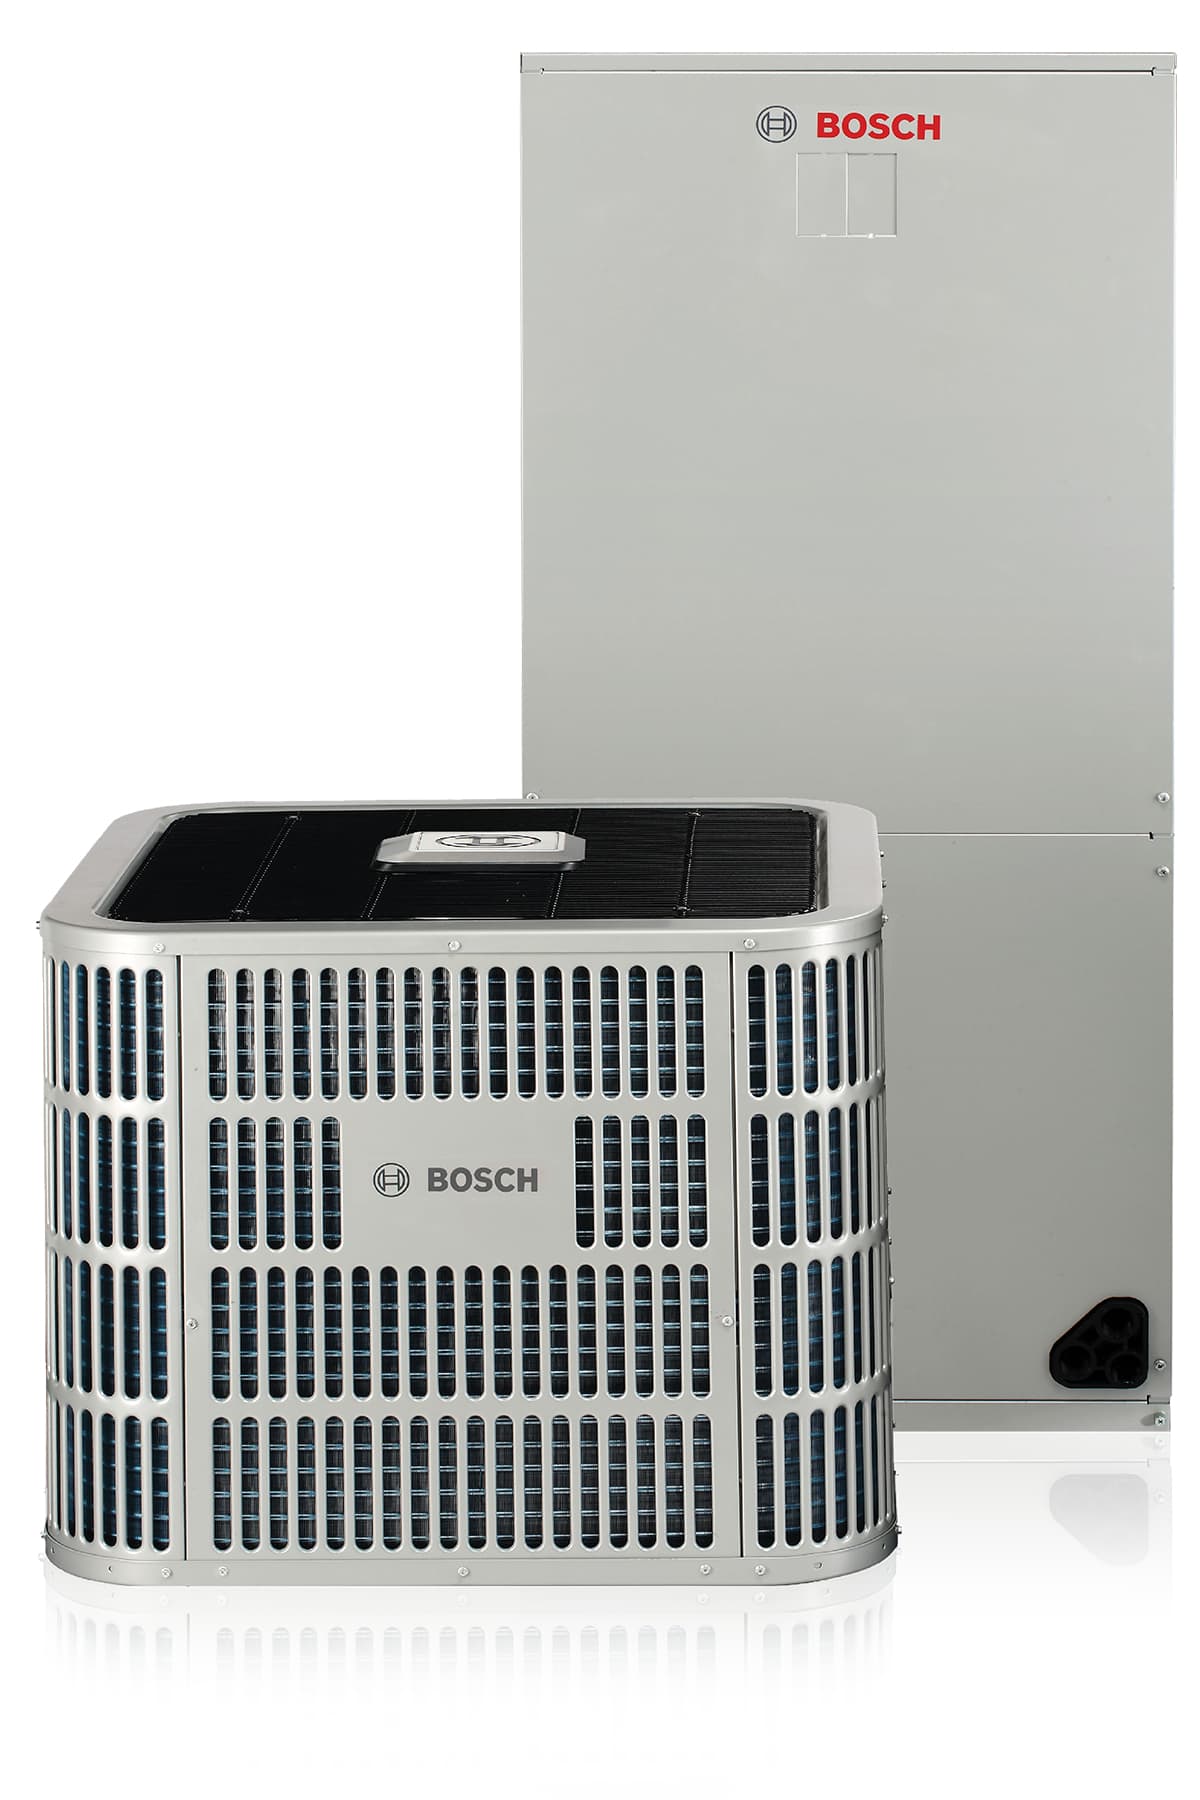 Bosch Inverter Ducted System (IDS) showing condenser and handler.